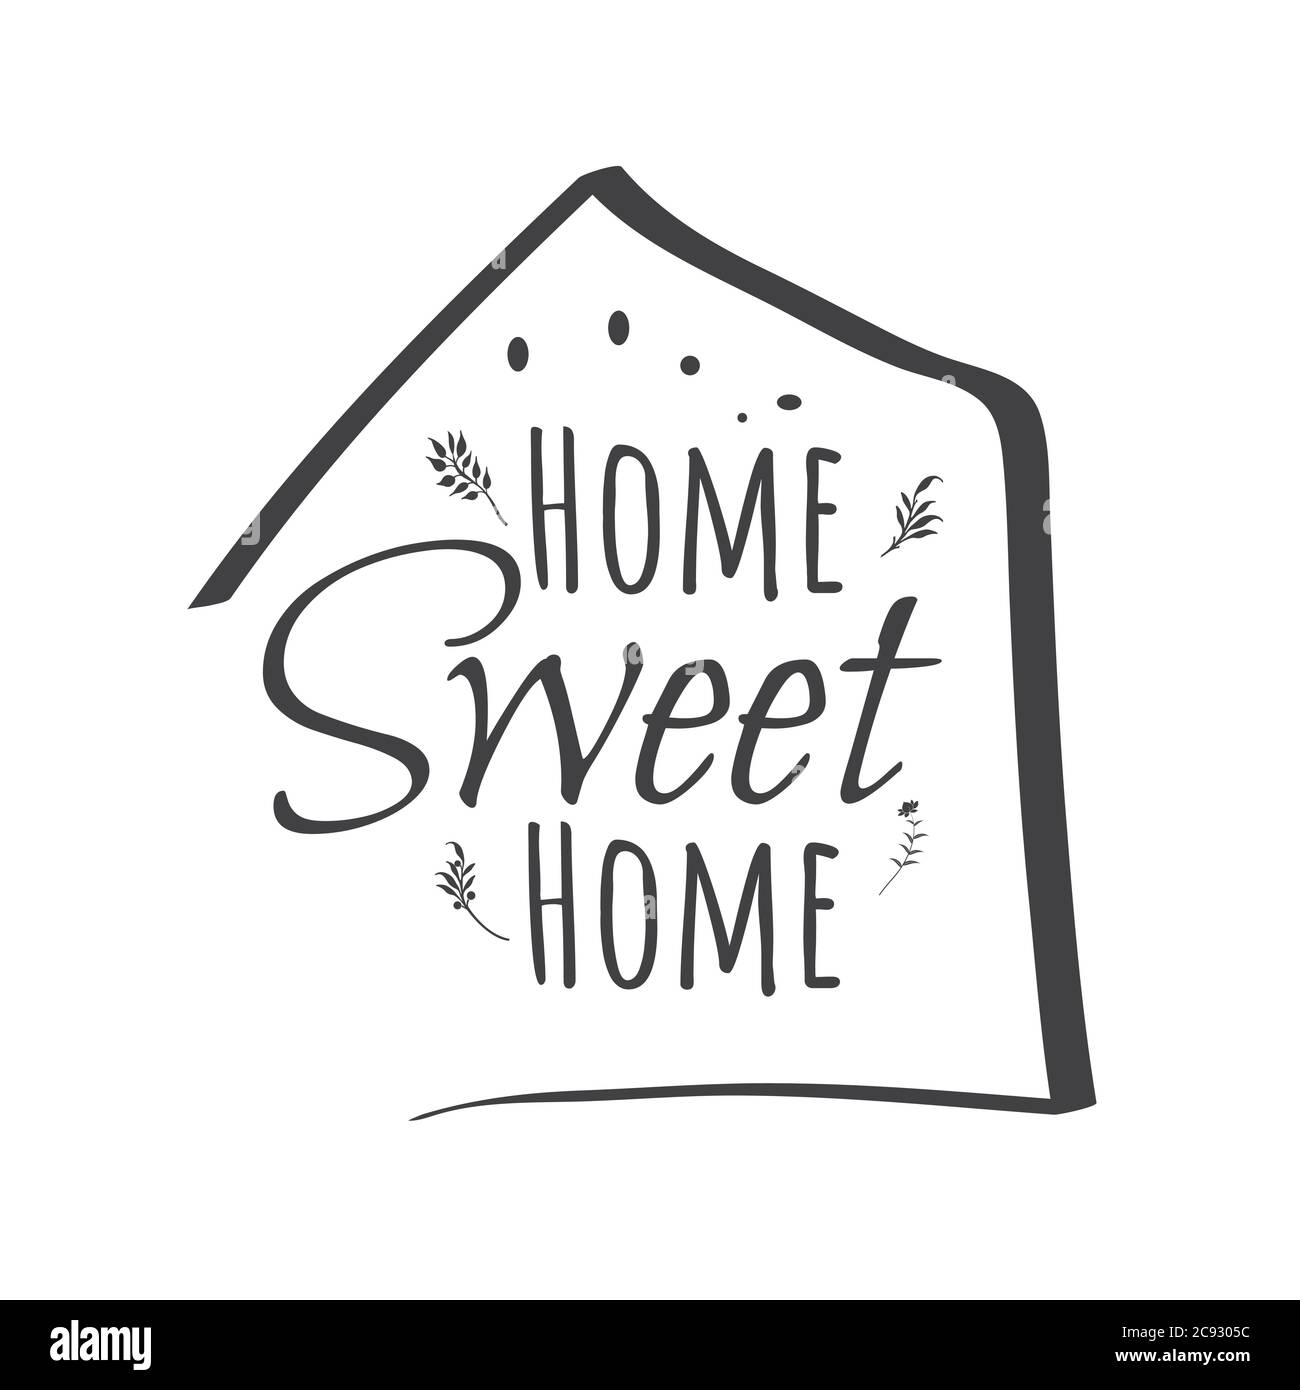 https://c8.alamy.com/comp/2C9305C/home-sweet-home-sign-on-white-background-flat-style-home-decor-sign-for-your-web-site-design-logo-app-ui-sweet-home-symbol-sweet-home-laurel-wr-2C9305C.jpg